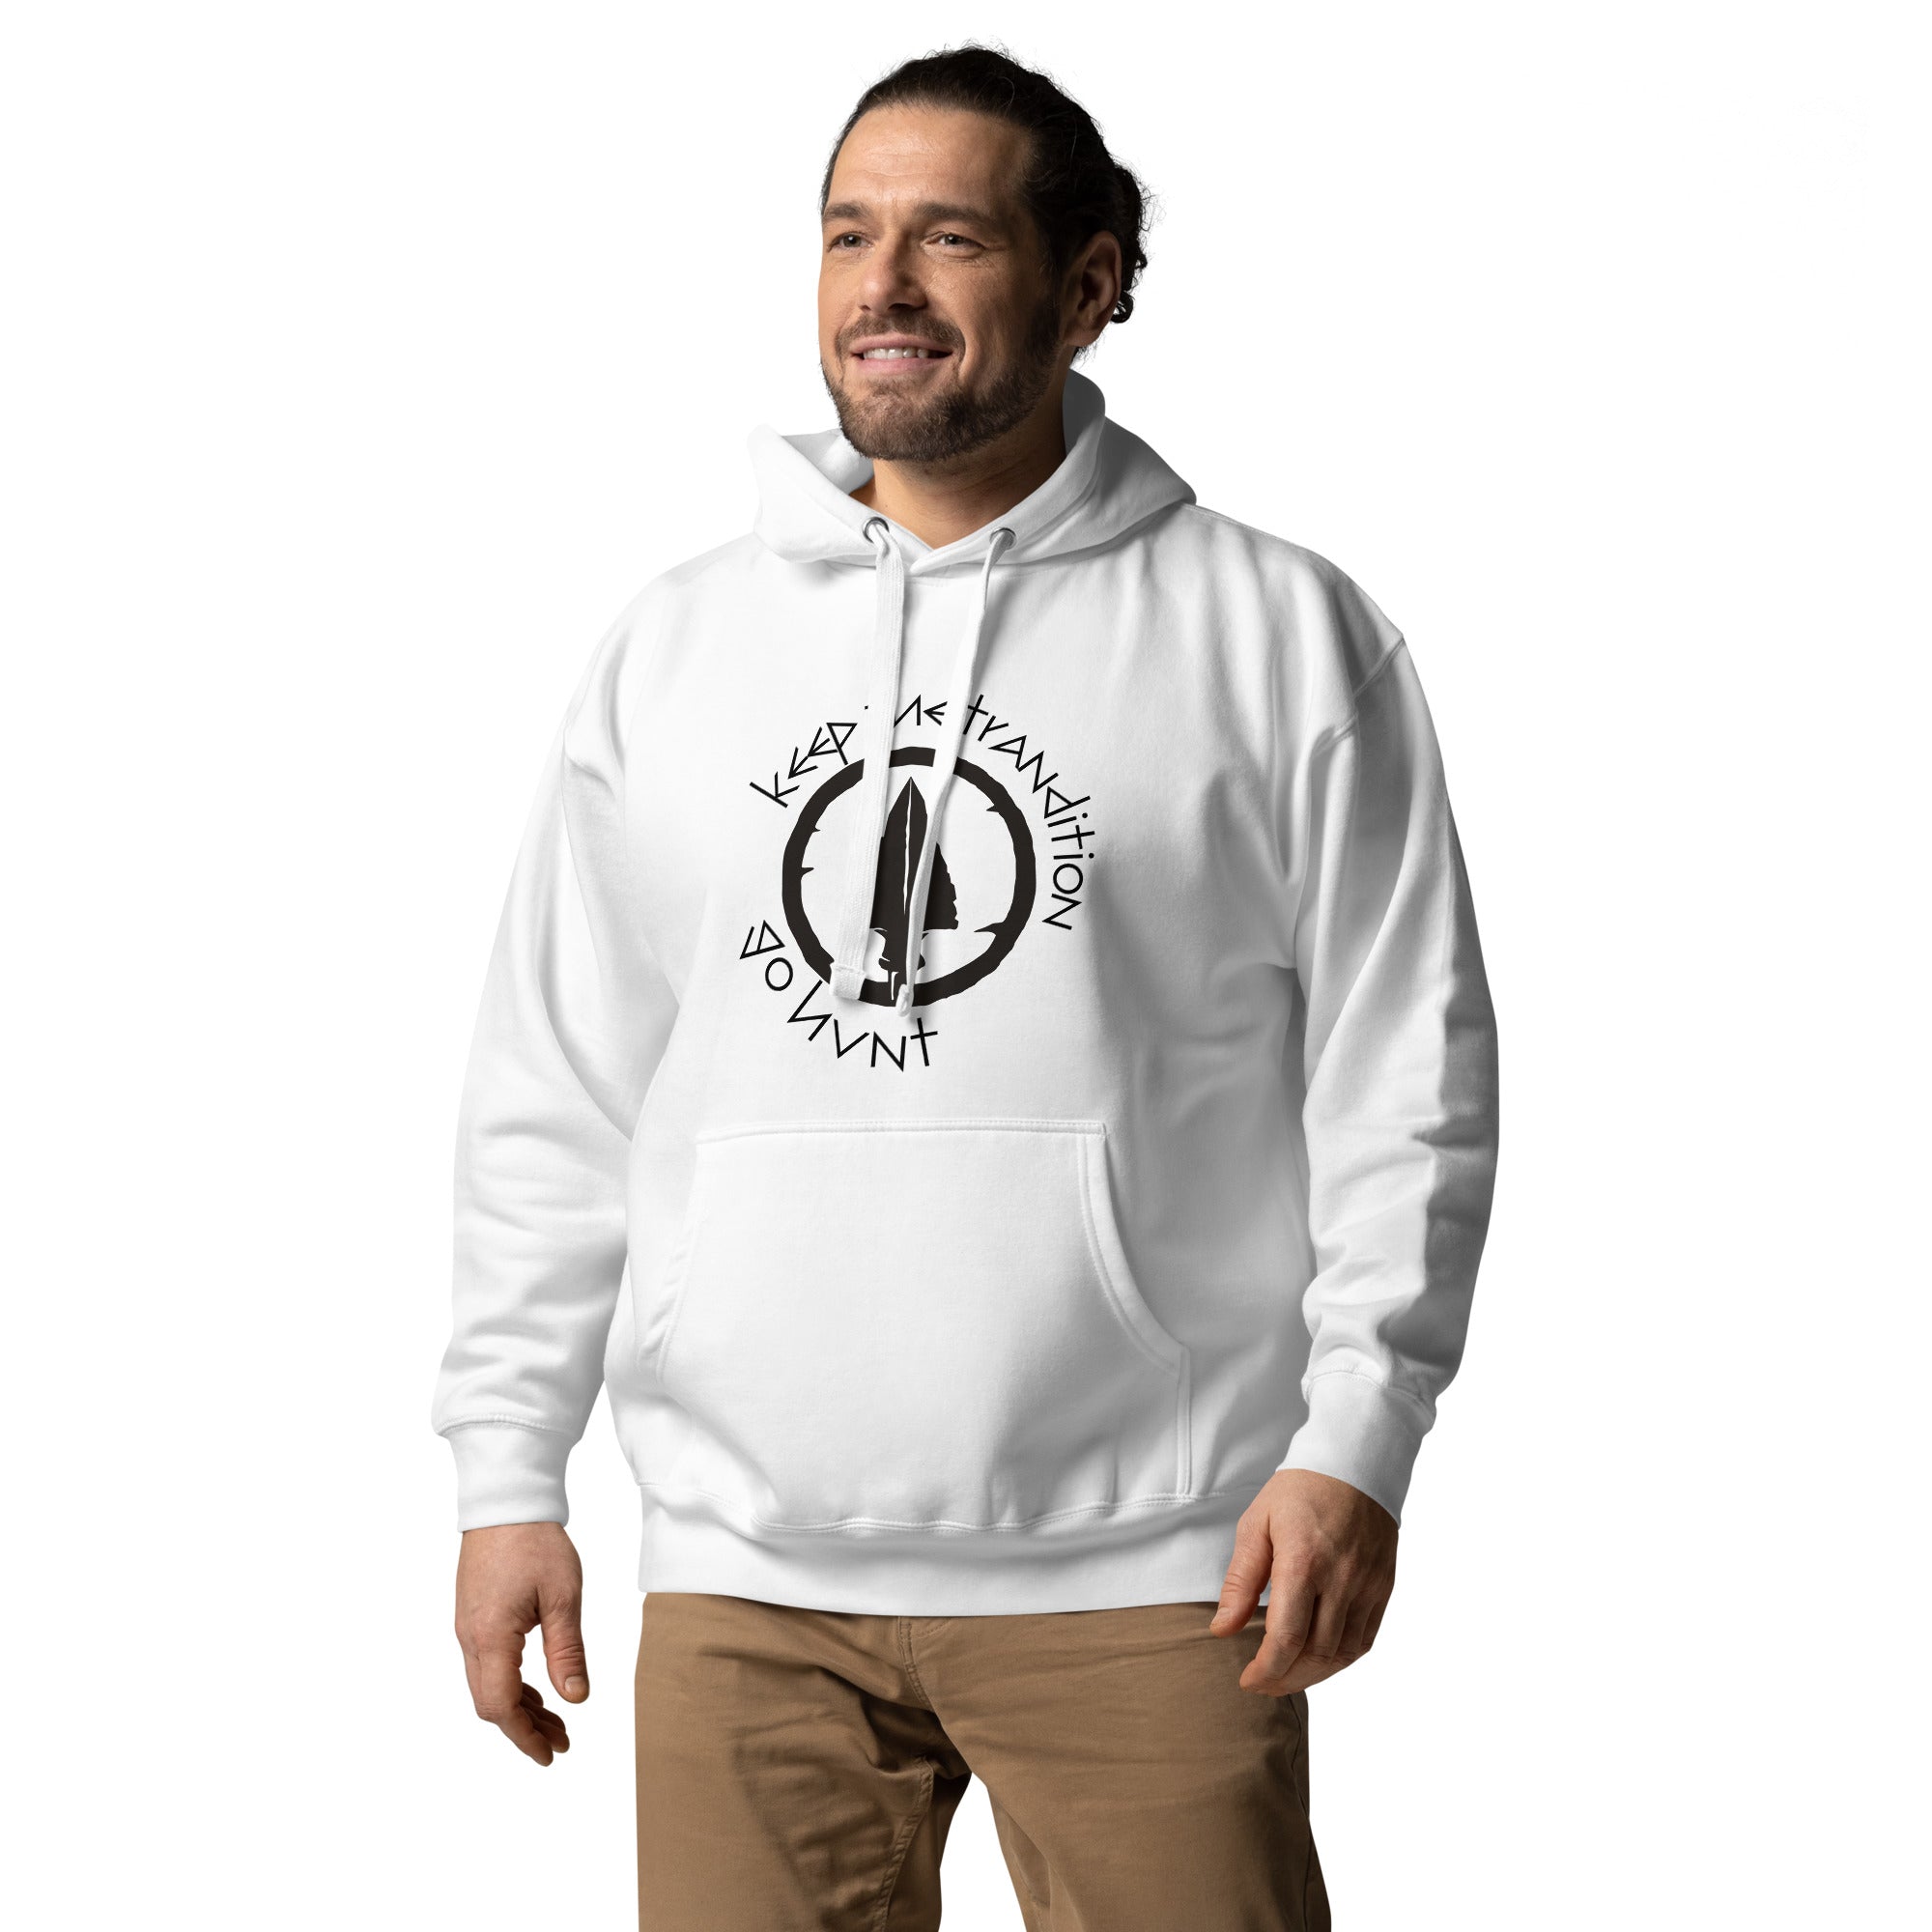 Keep The Tradition Men's Heavy Hoodie - Go Hunt